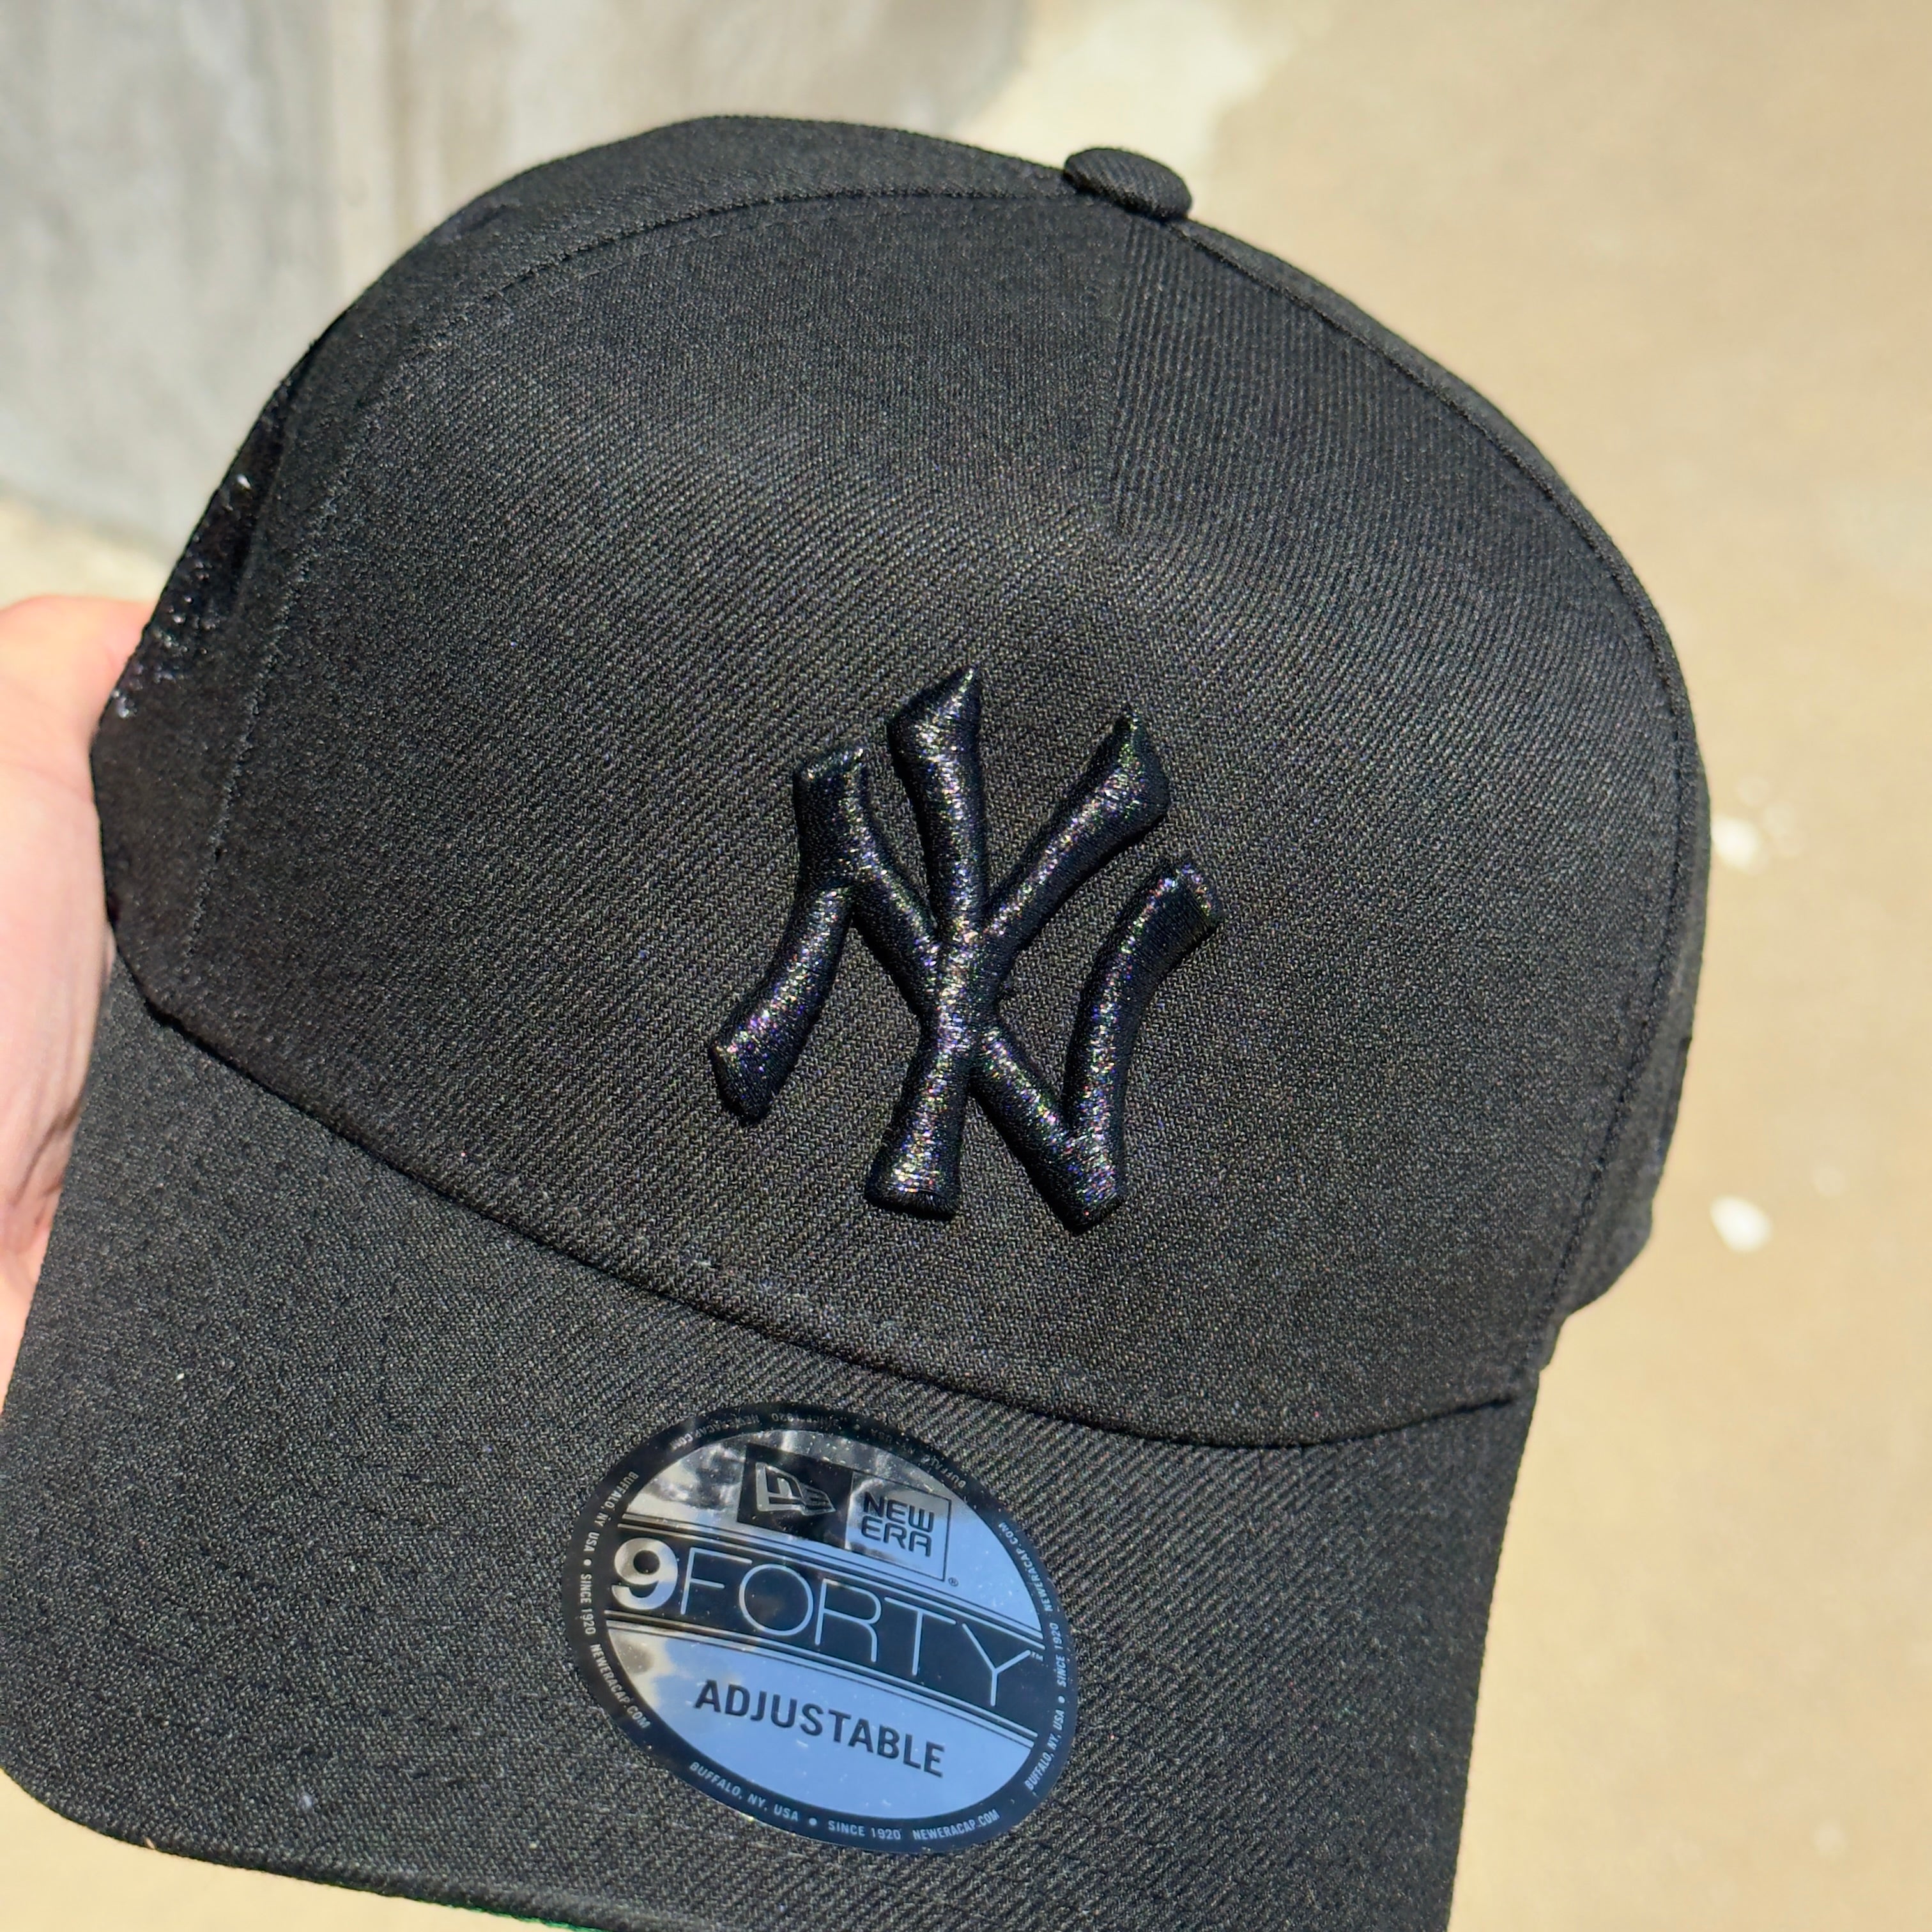 NEW Black New York Yankees 1999 World Series New Era 9Forty Adjustable One Size A-Frame